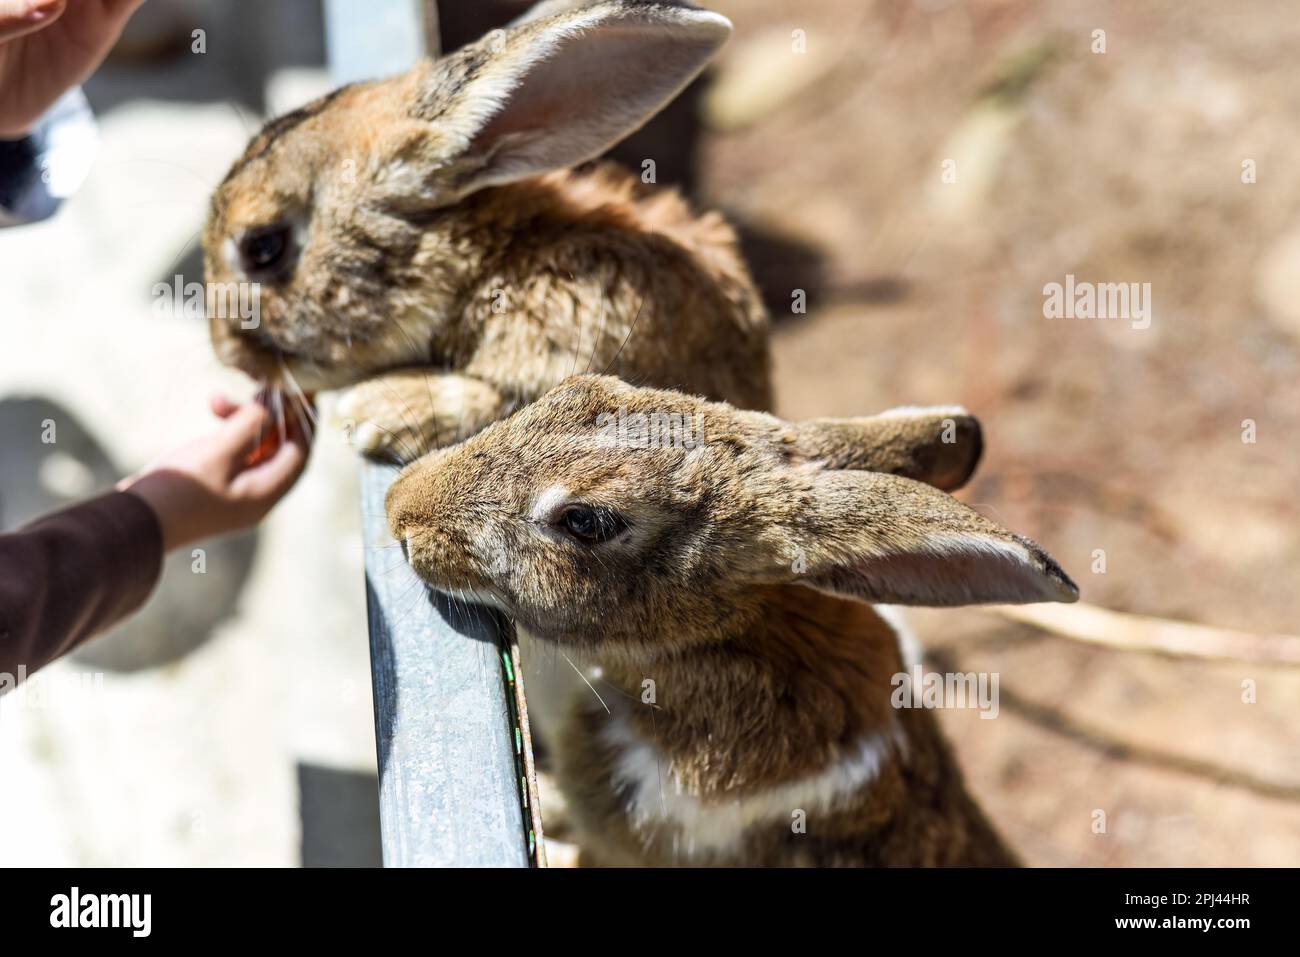 Two rabbits Flemish Giant eating food from a kids hand Stock Photo